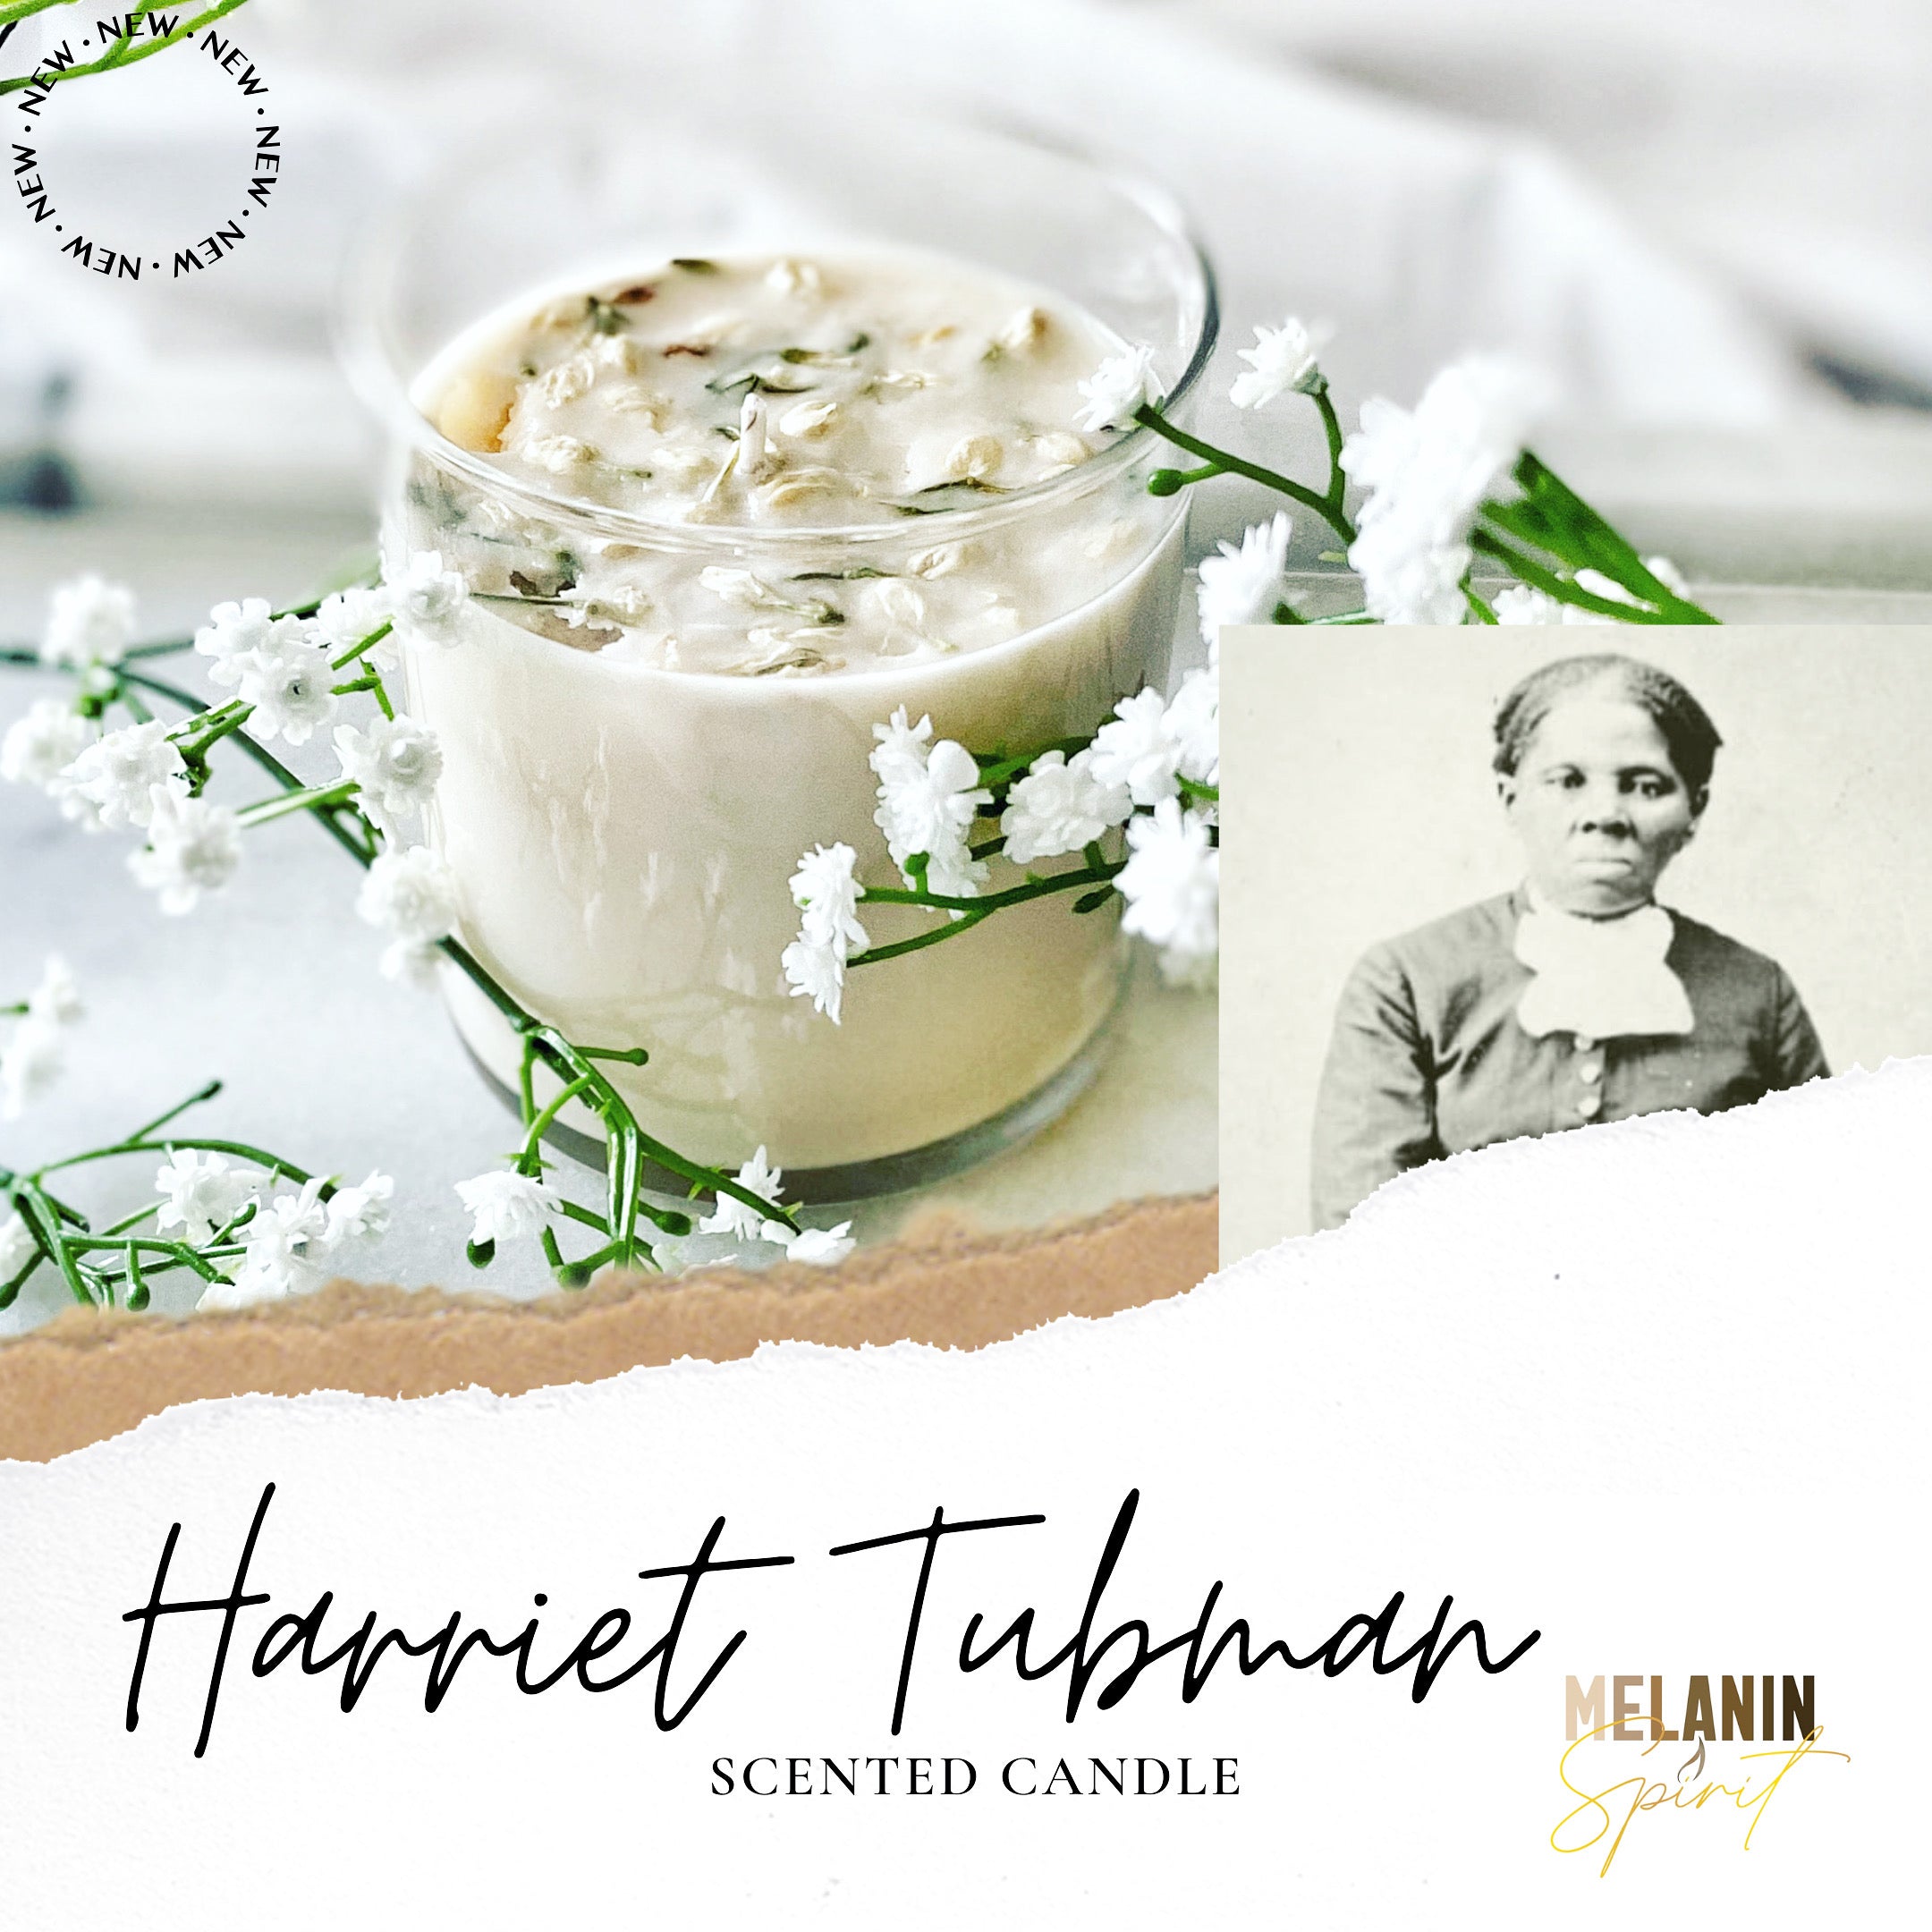 Harriet Tubman inspired Scented candle with notes of cactus blossoms and Jasmine.